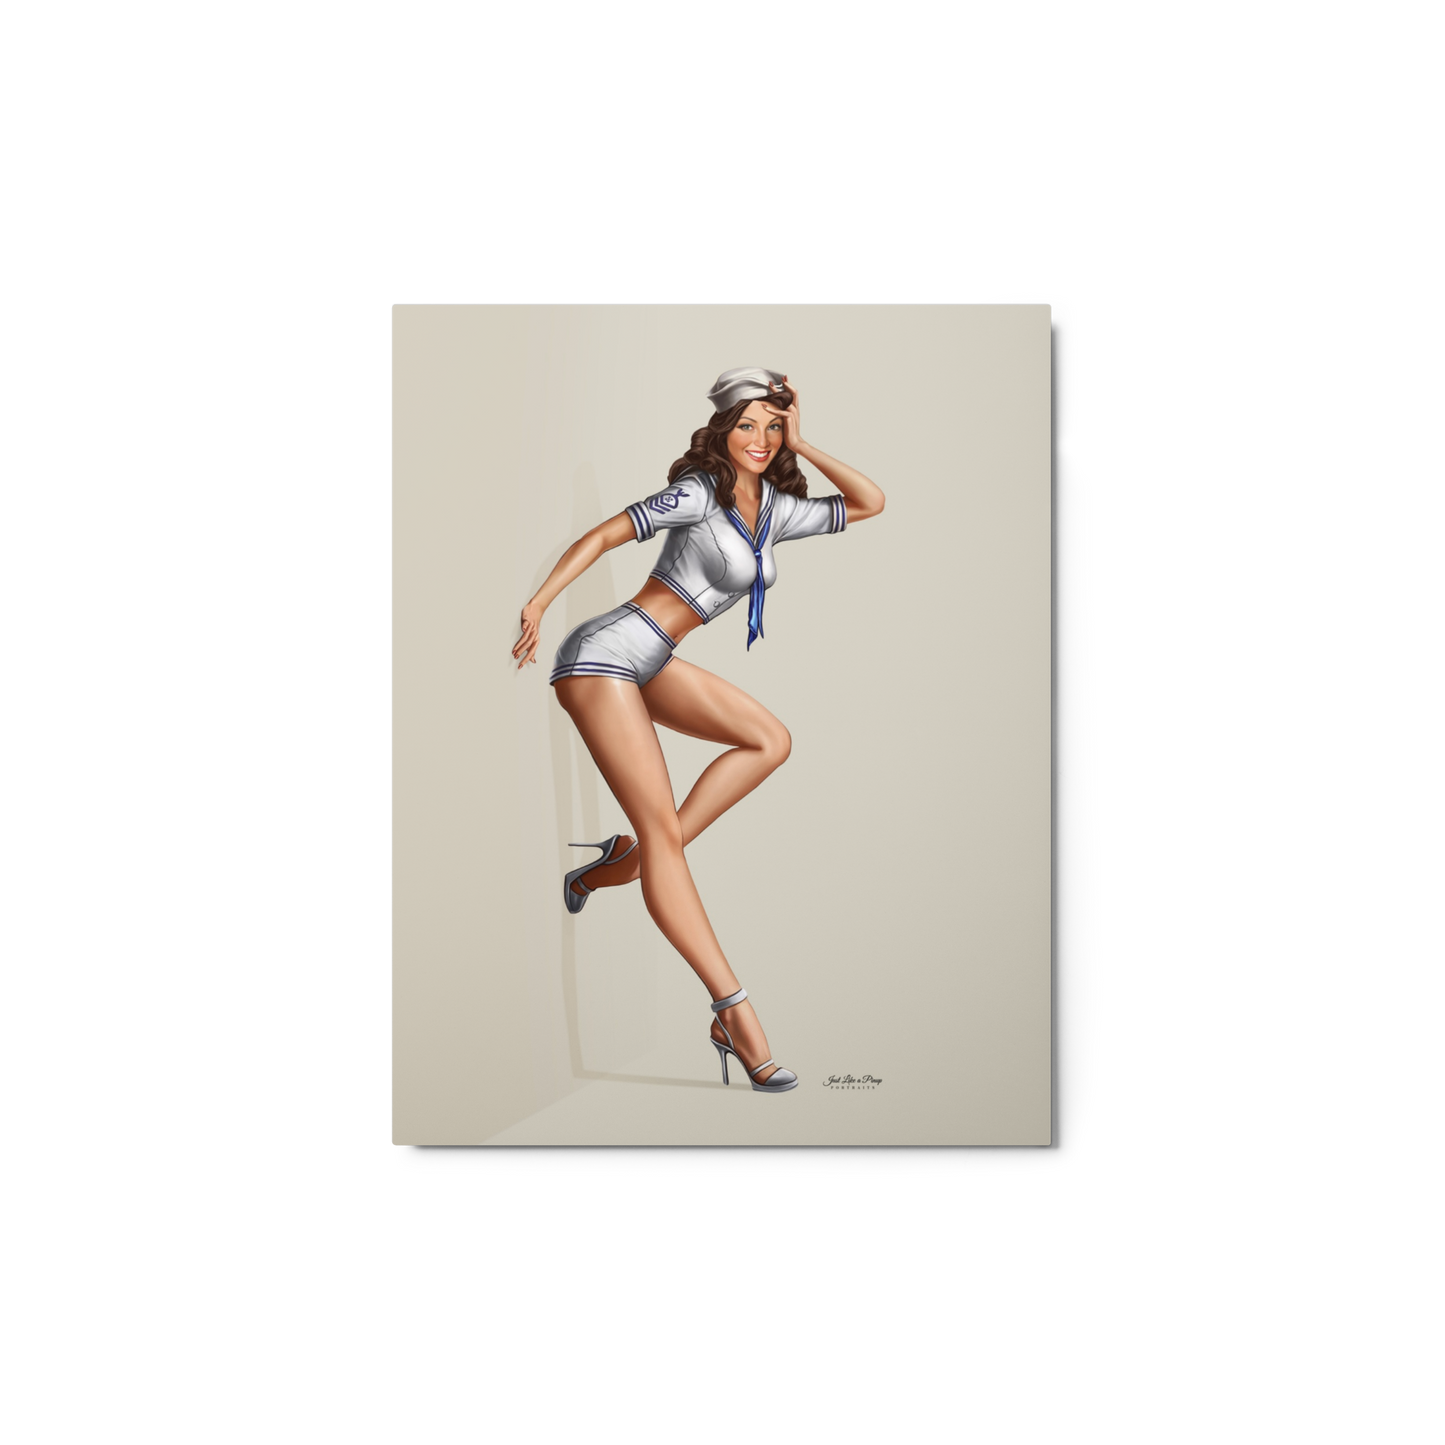 Personalized Metal Prints - Just Like A Pinup